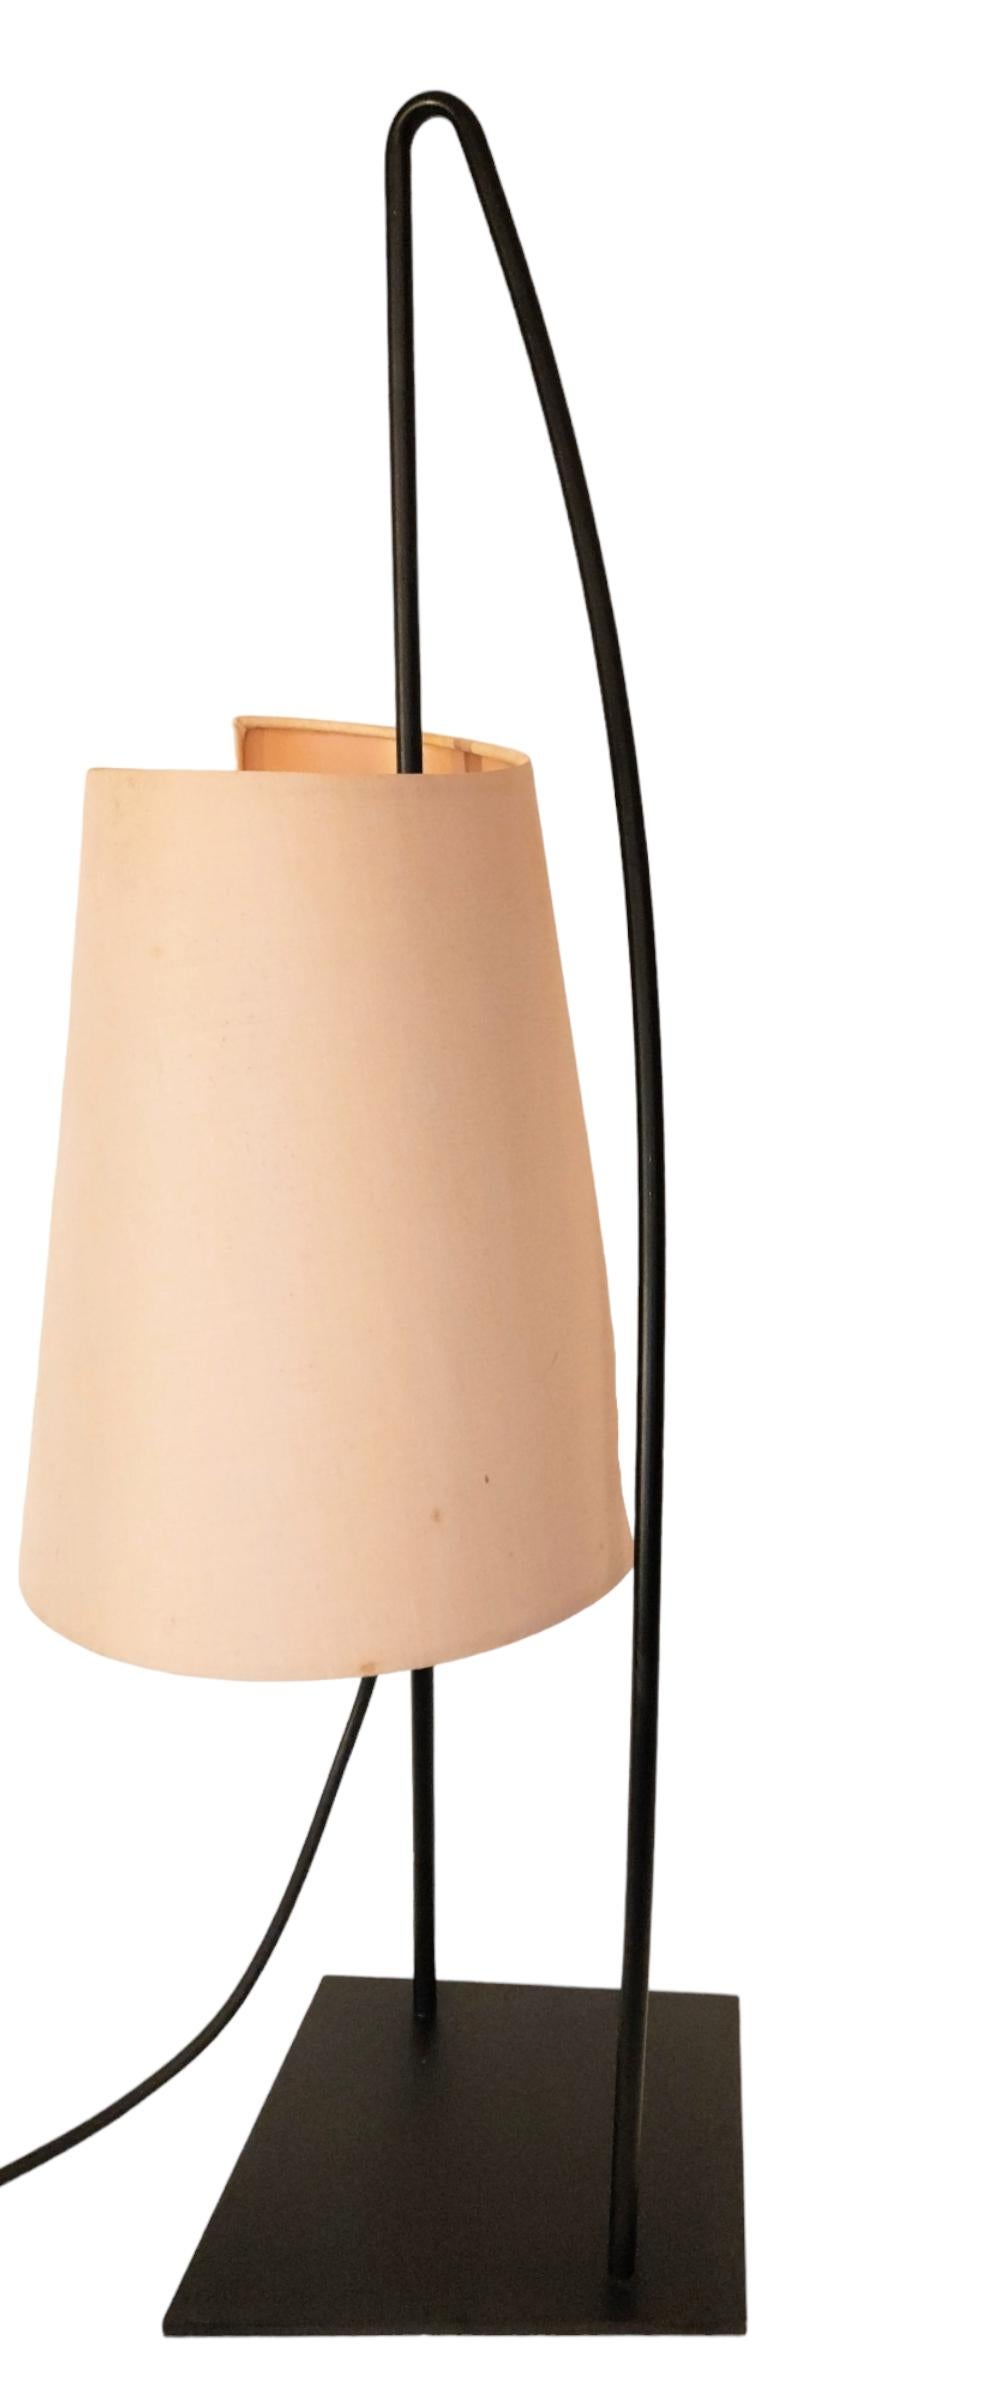 An Italian sculptural table lamp by Italiana Luce manufactured in Italy, circa 1960s.
The black lacquered base plate is slightly trapezoid. and supports a curved black lacquered metal loop.
The cast plastic socket slides up and down and rotates